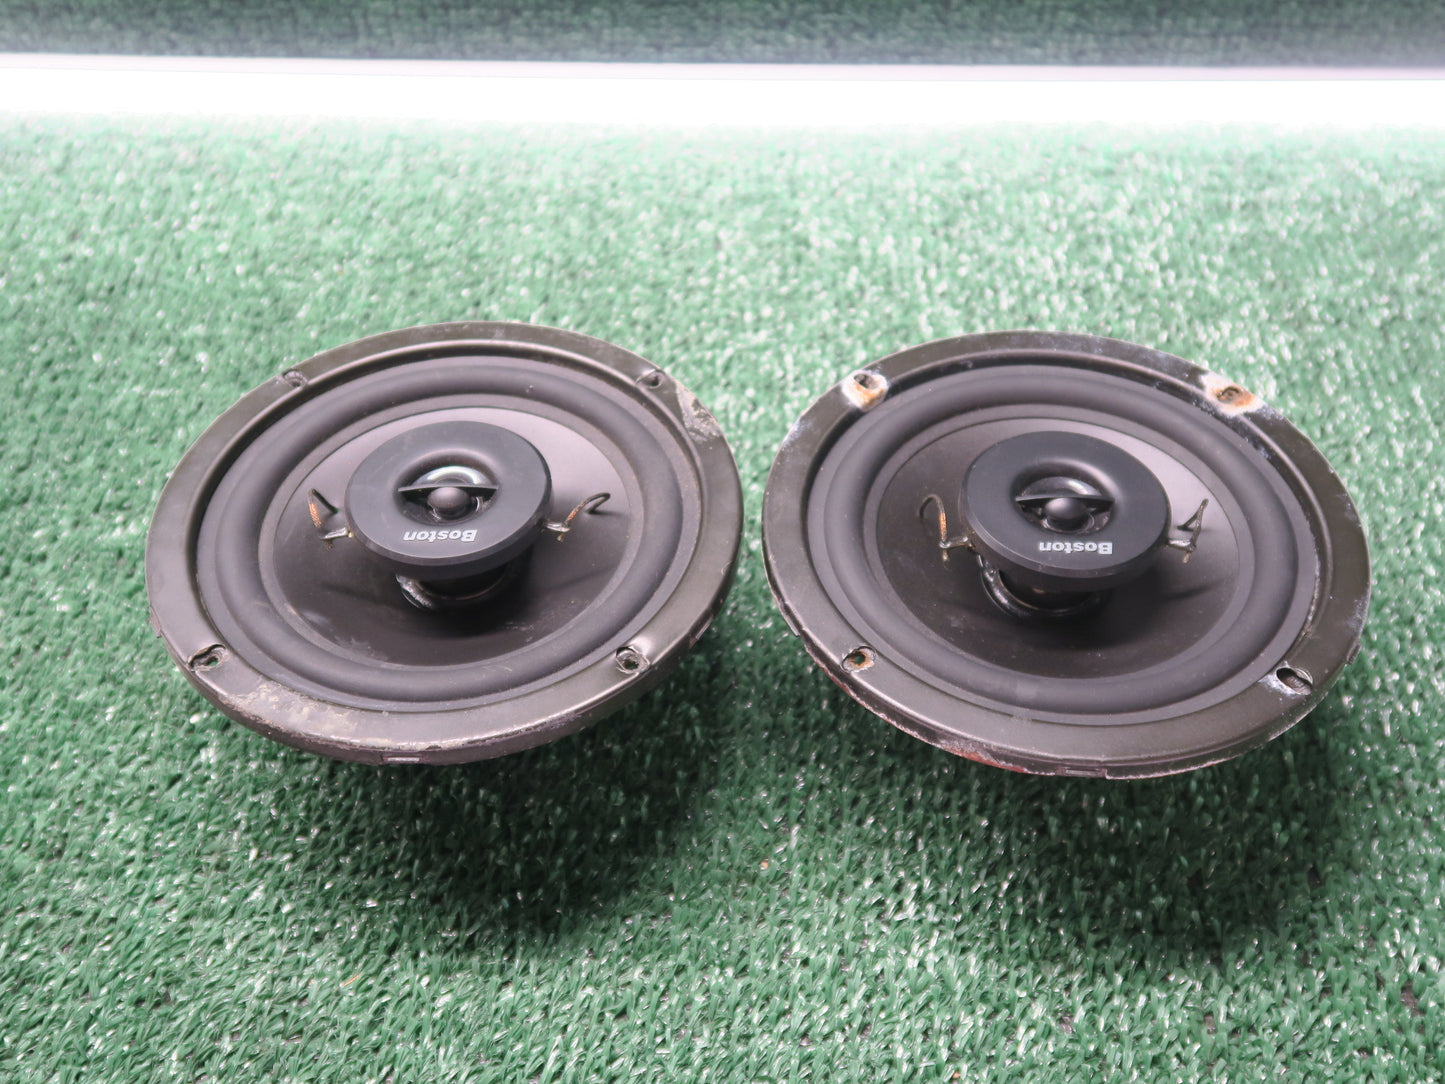 Boston RX57 2-Way Coaxial Car Speakers Made in USA Set of 2 Tested